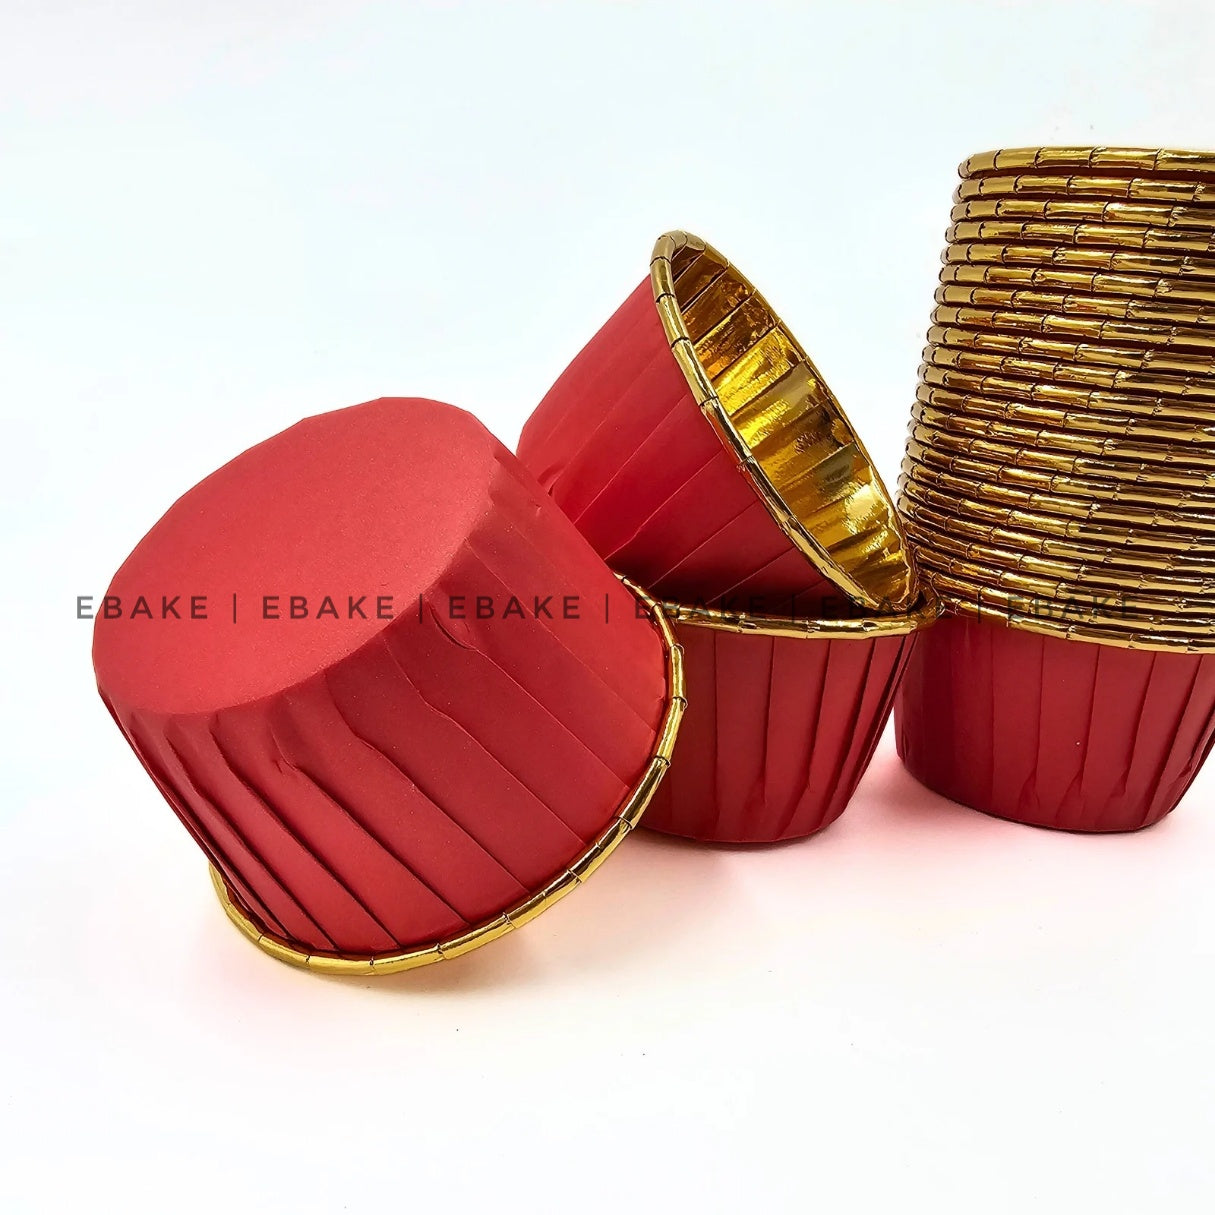 Imported Golden Lined Rolled Rim Muffin Cup / Cupcake Liners - Red (Set of 25 pieces)